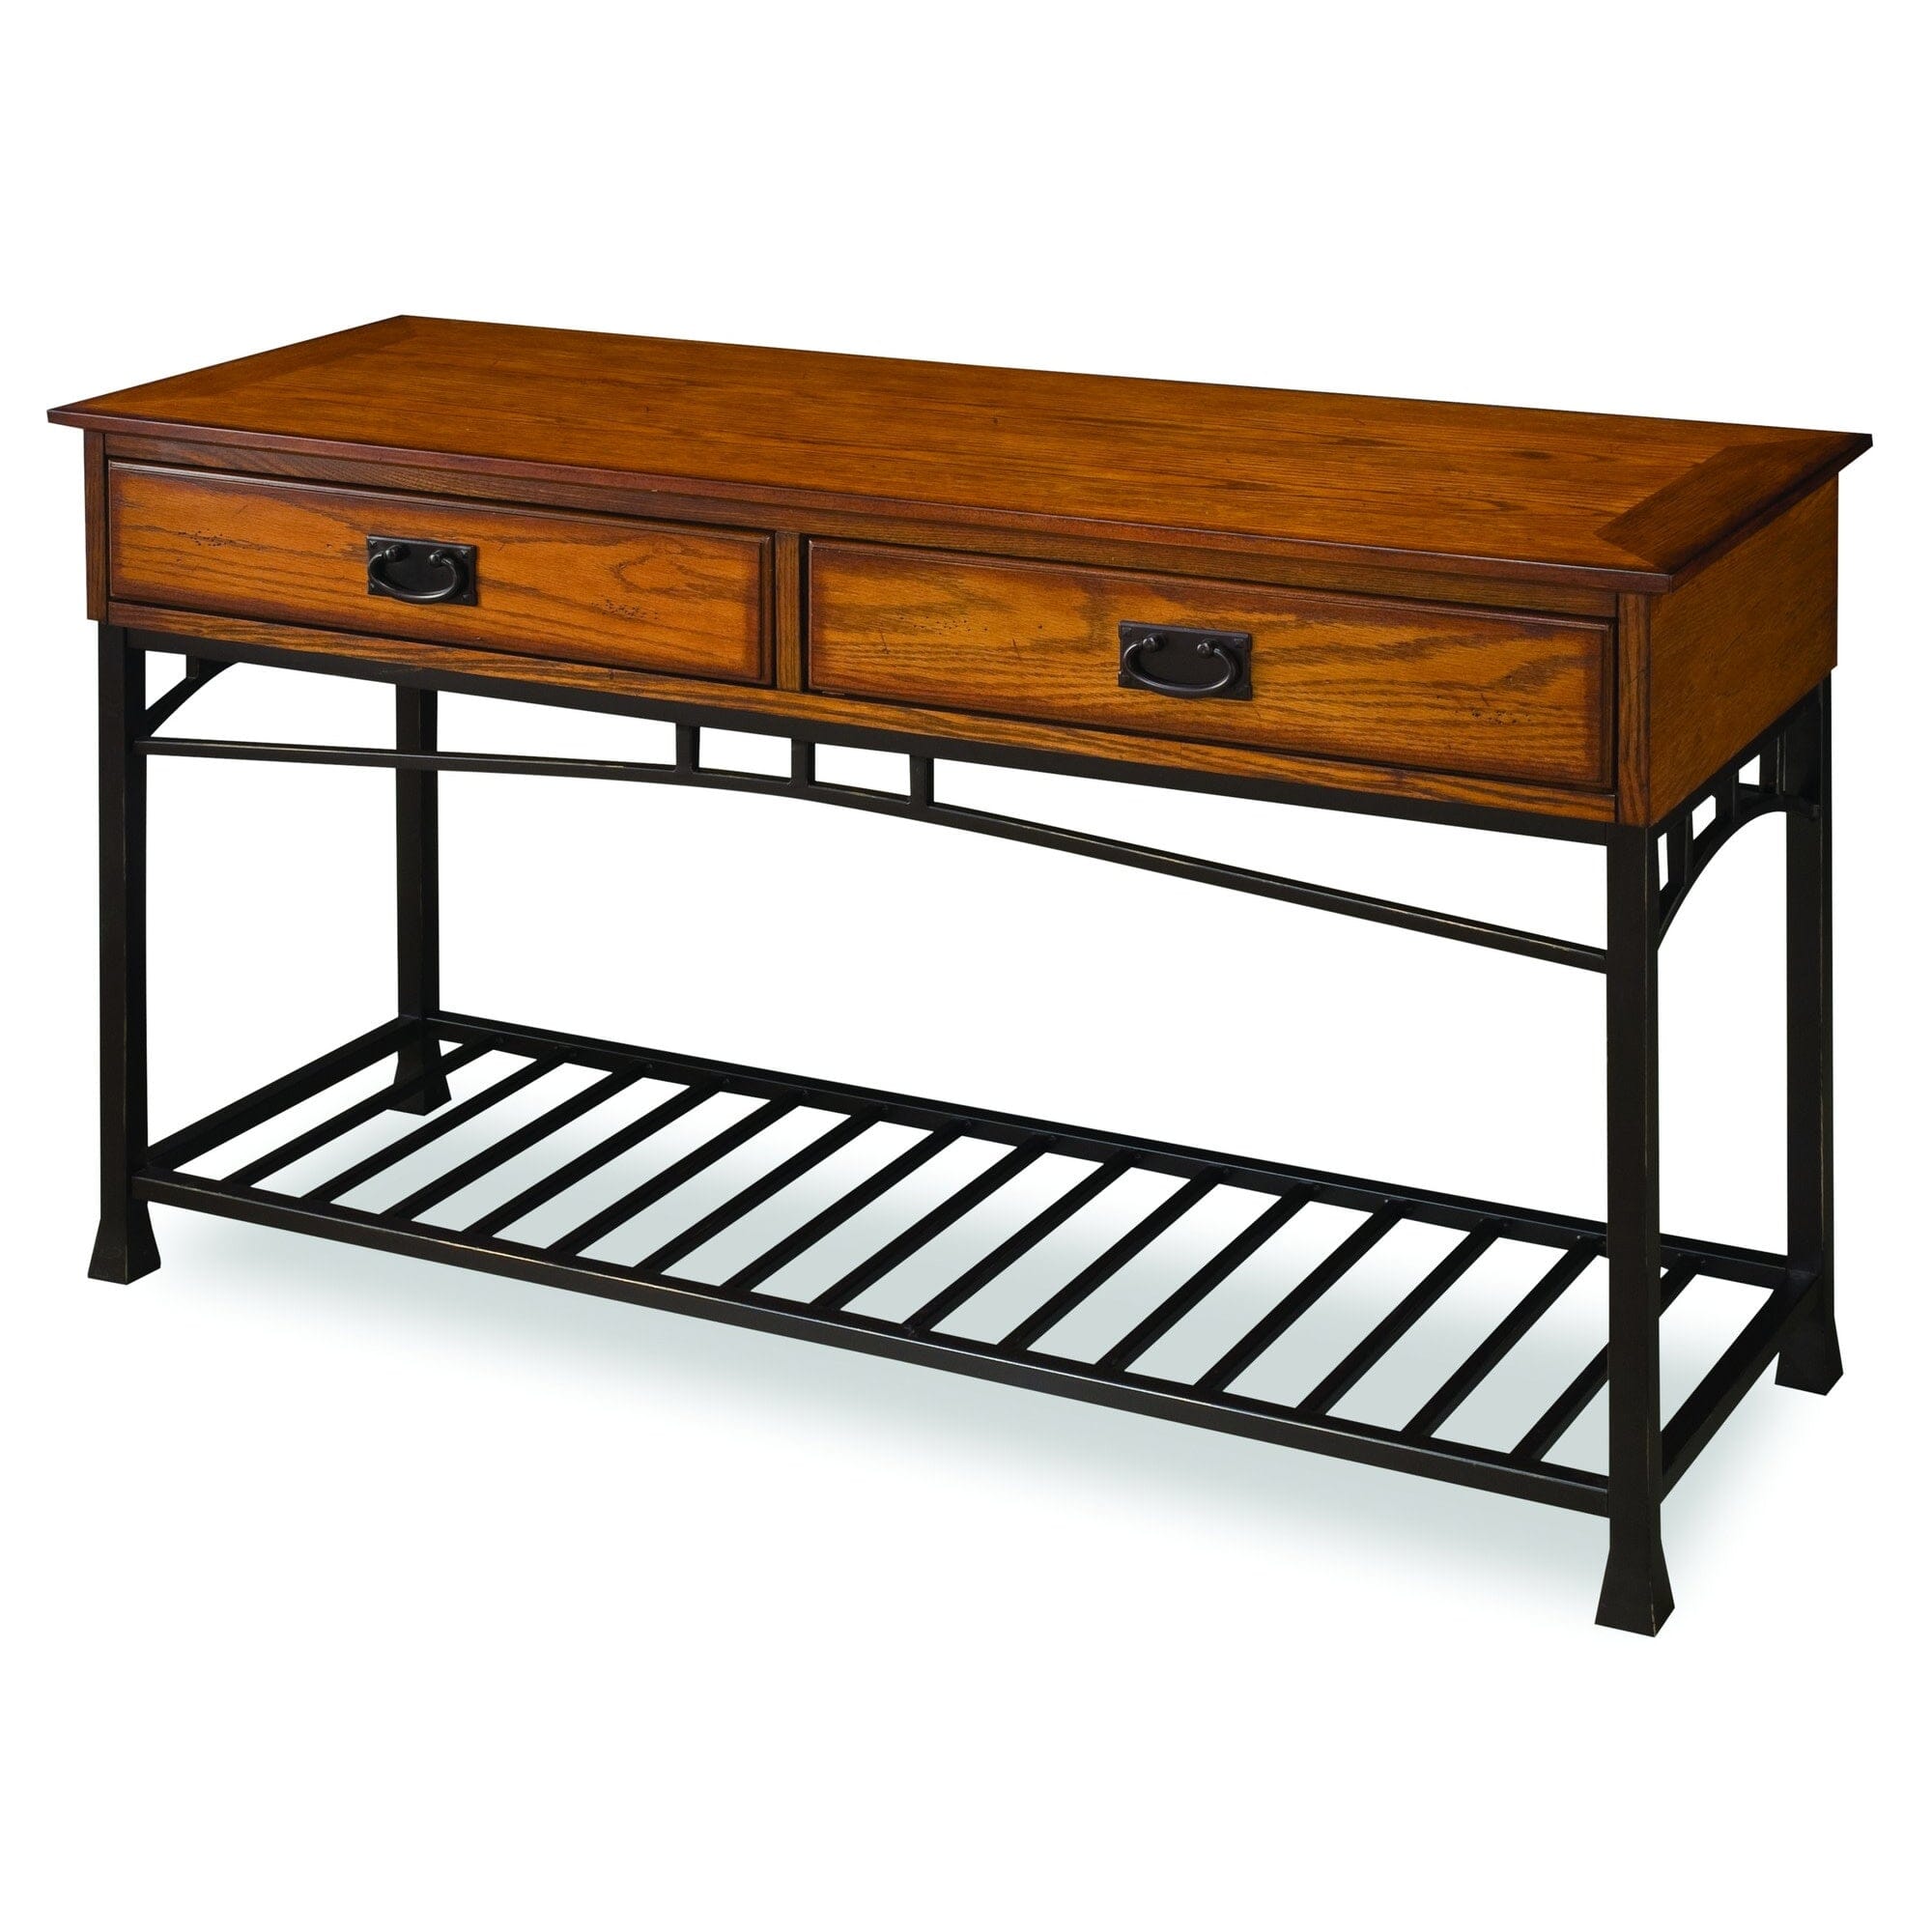 Traditional Console Table By Modern Craftsman Console Table Modern Craftsman